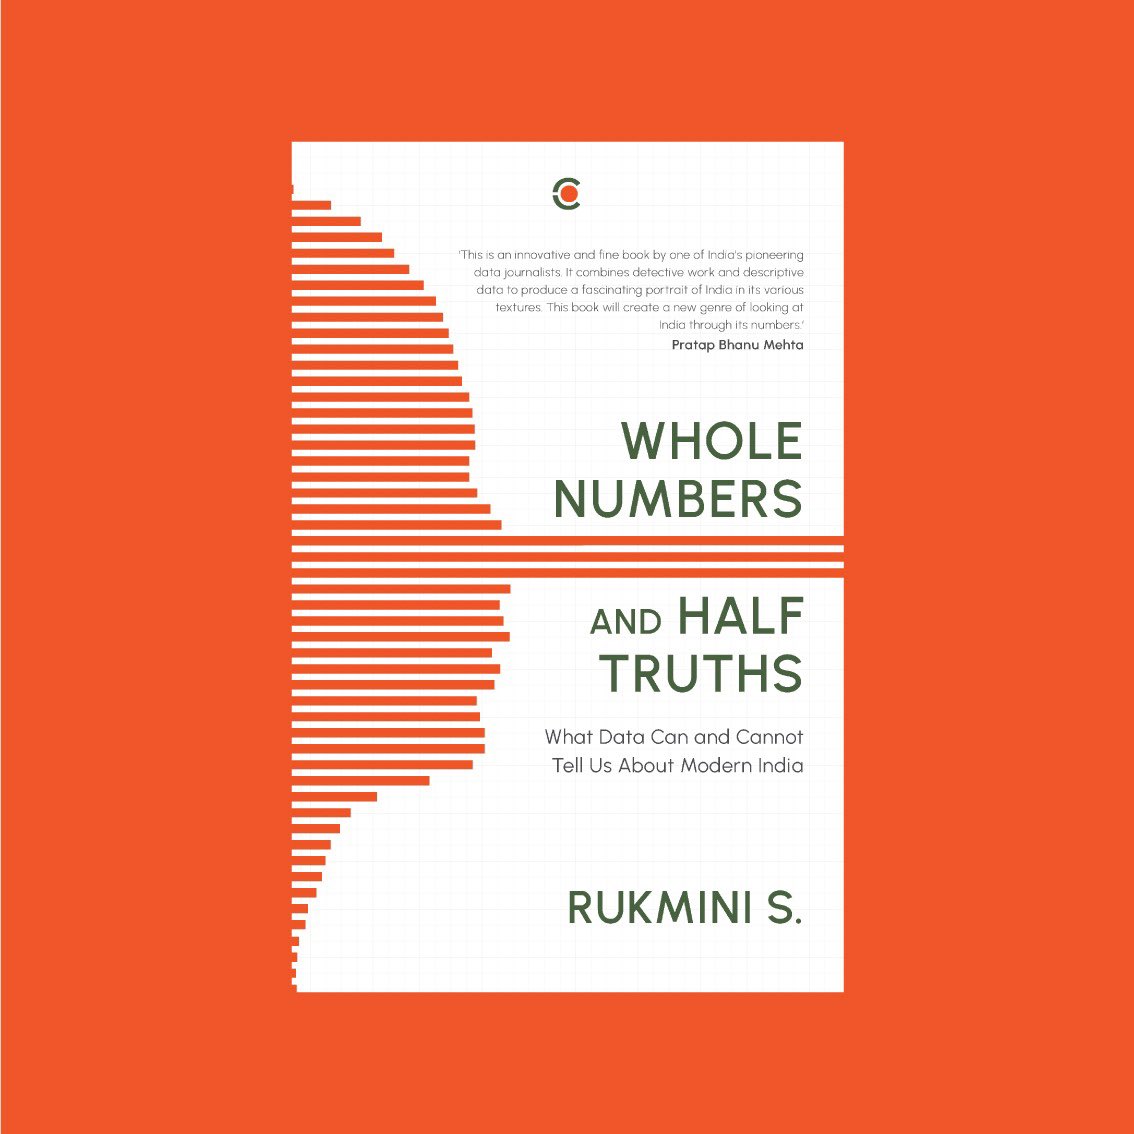 #ReadandElect
@Rukmini’s Whole Numbers and Half Truths is based on a two-decades long data-driven research to understand the grassroot political reality of India. 

This is a must read before one votes.

@ContextIndia #Elections2024
#GeneralElection2024 #LokSabaElection2024